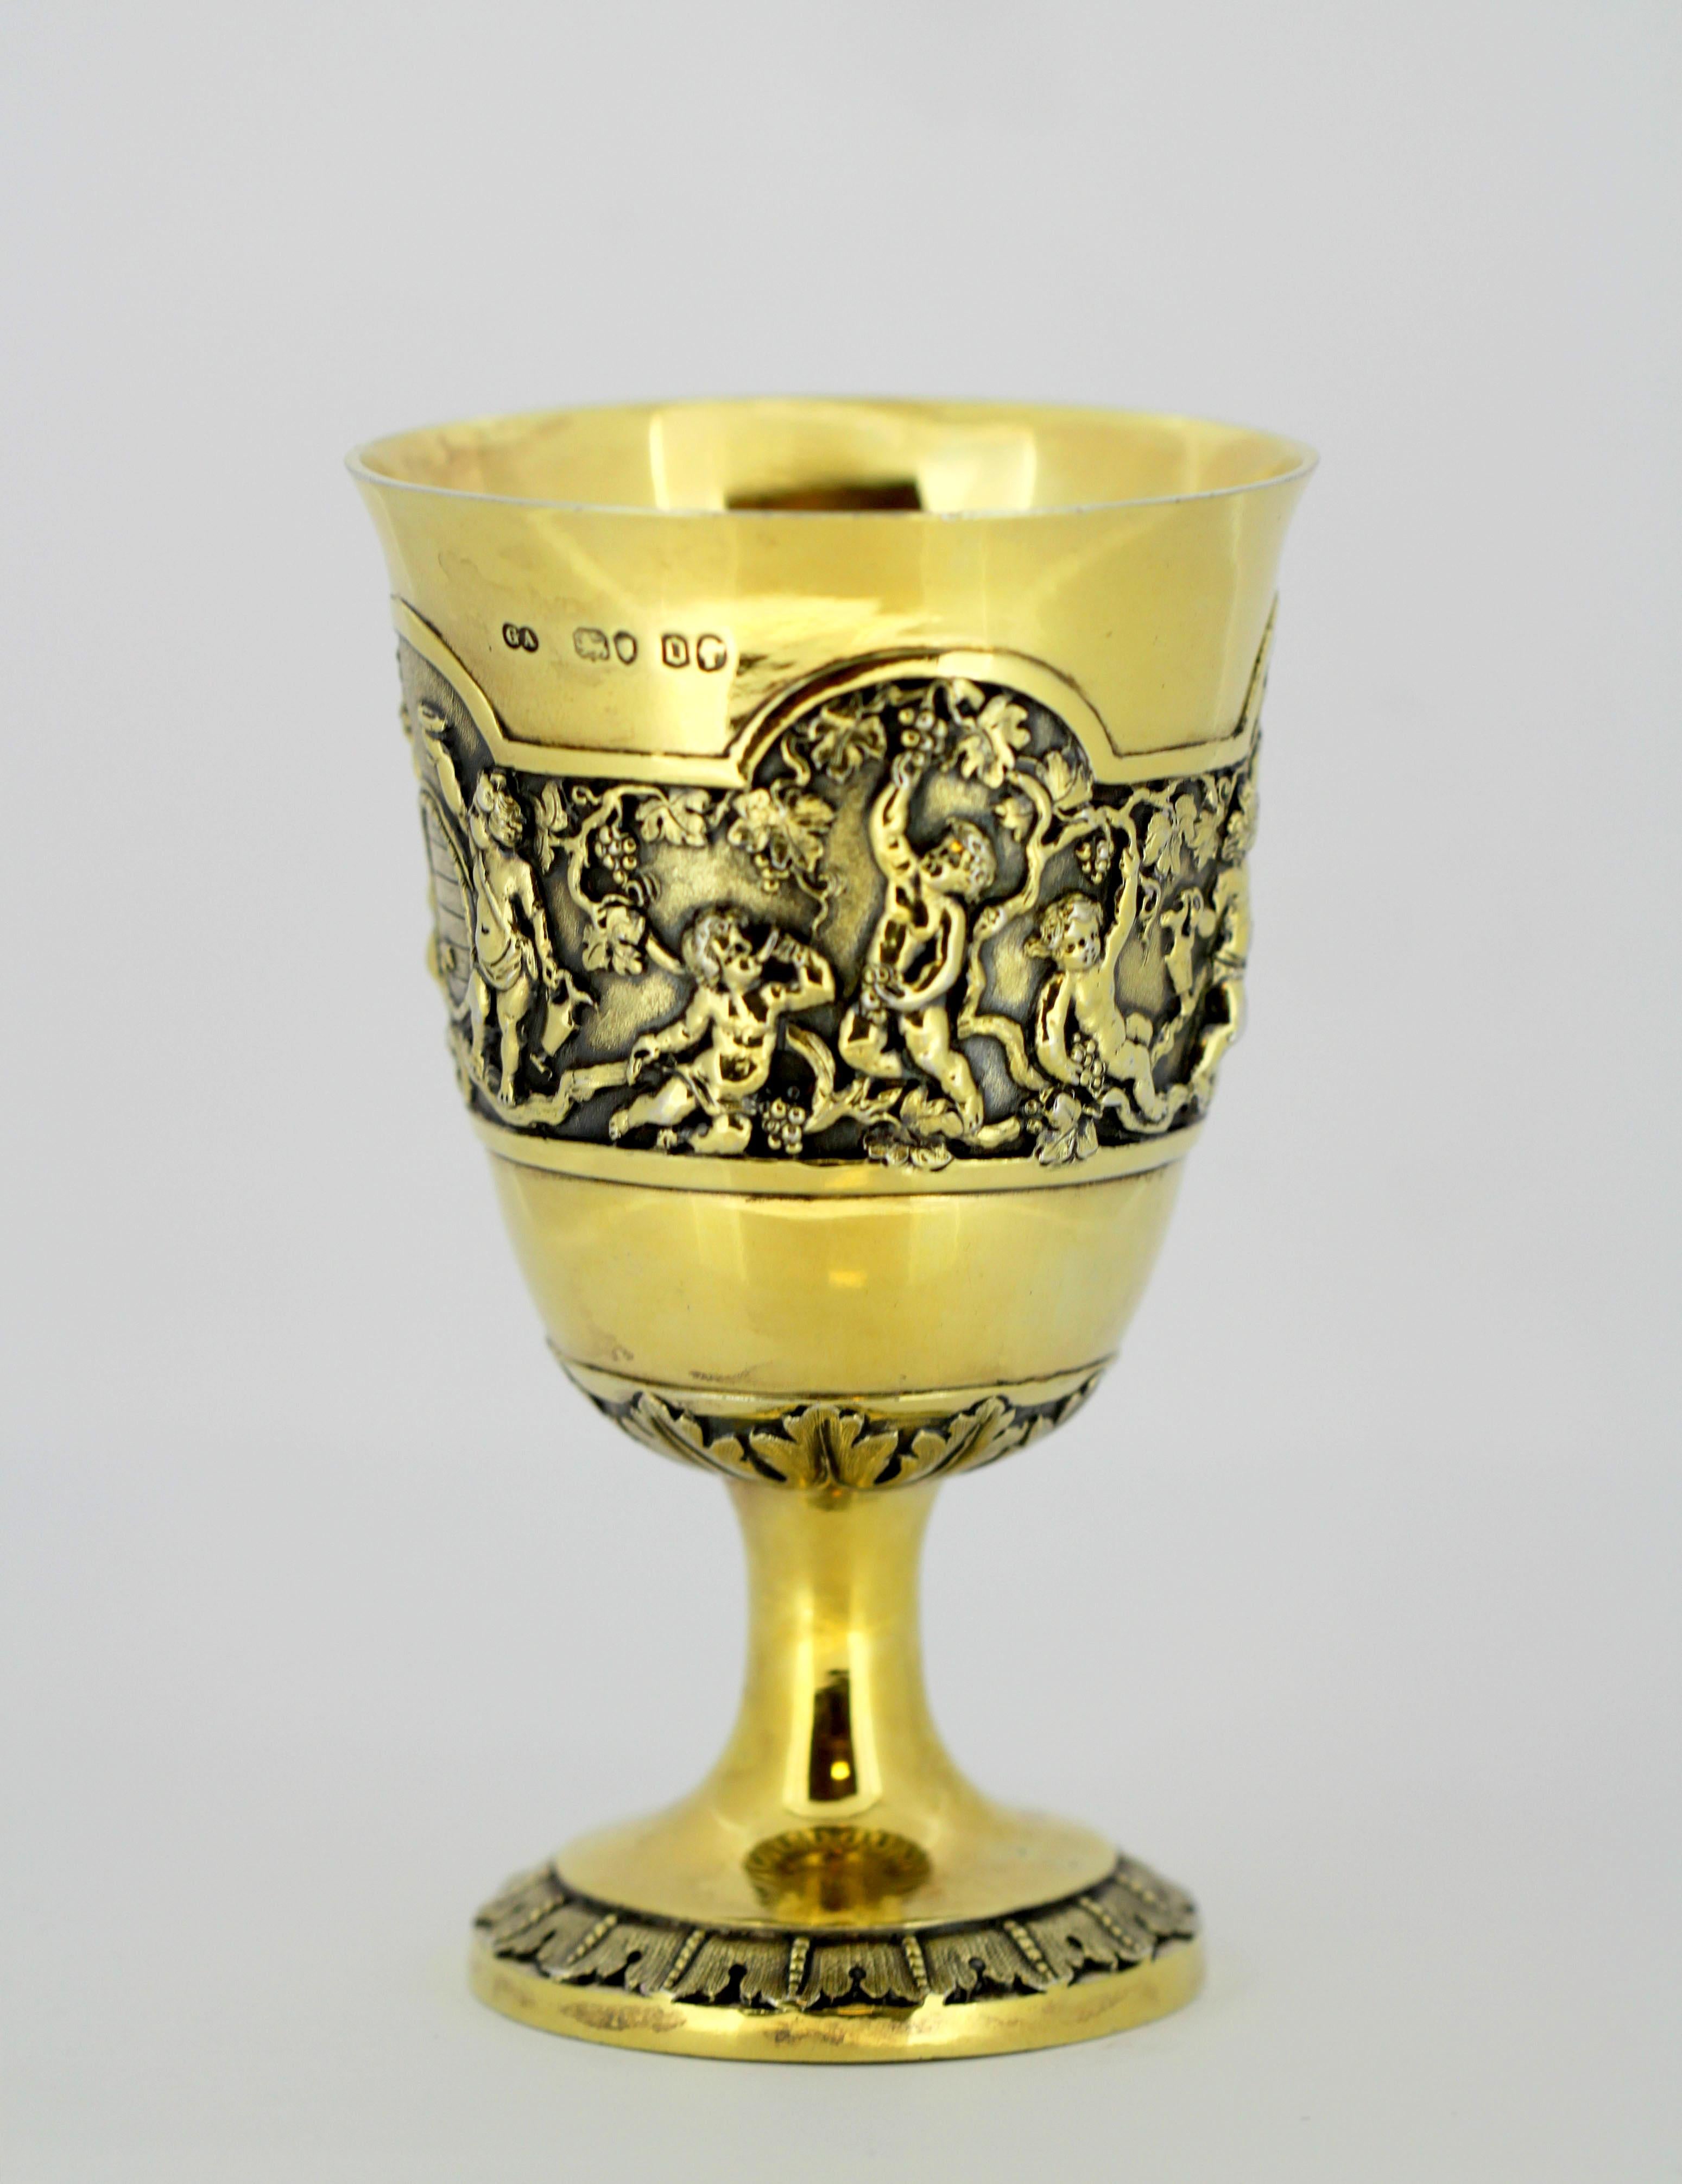 Antique Victorian gilded silver goblet
Maker: Chawner & Co. - George William Adams
Made in London, 1869
Fully hallmarked.

Dimensions:
Size: Diameter/height 13.5 x 8.3 cm
Weight: 260 grams

Condition: Surface wear and tear from general